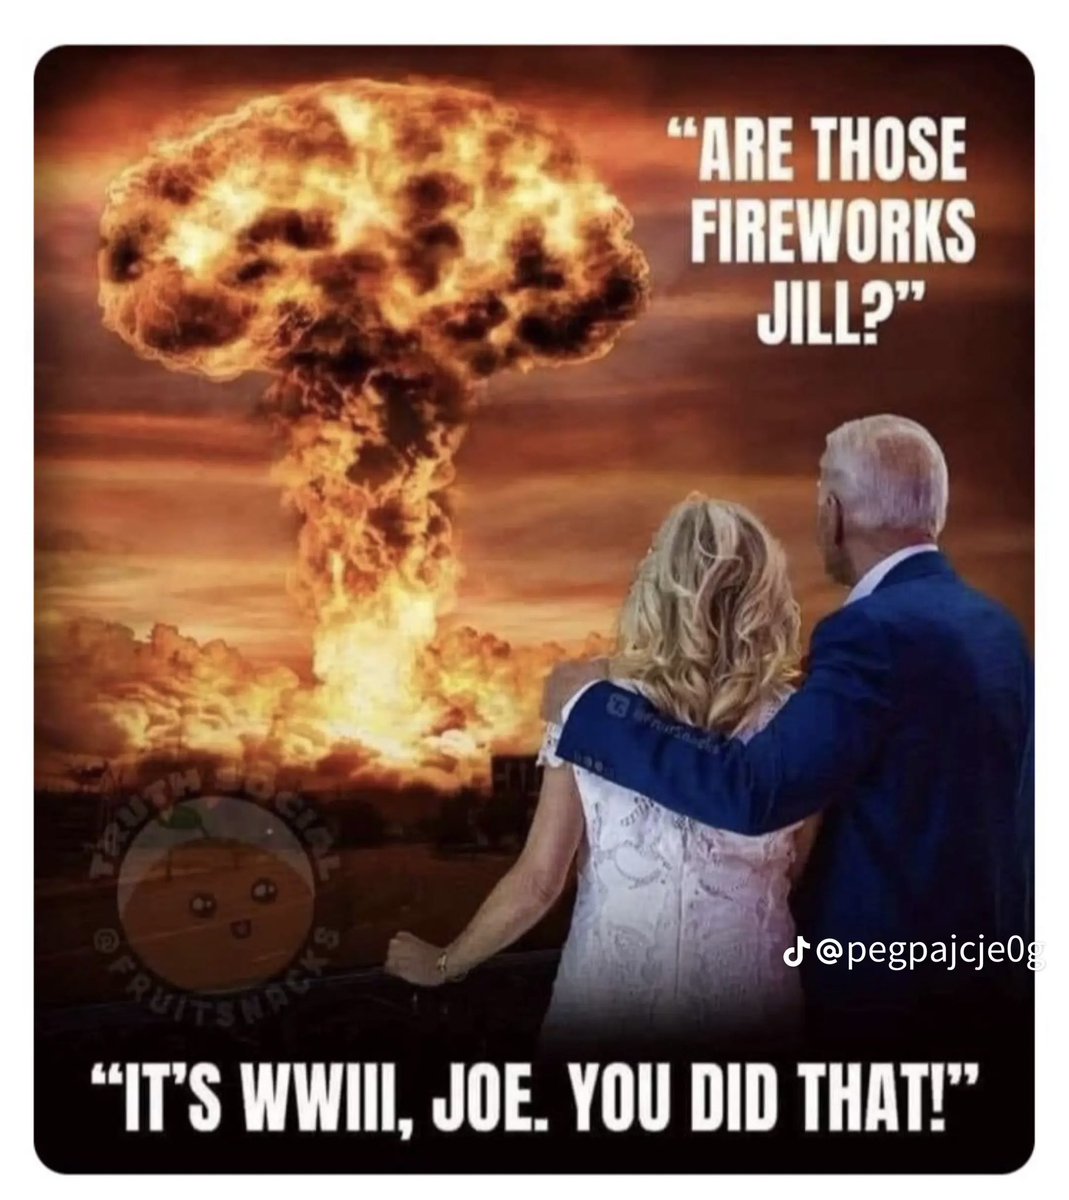 Joe Biden is on the verge of starting WWIII on two separate fronts. Who in their right mind could ever vote for him? FJB